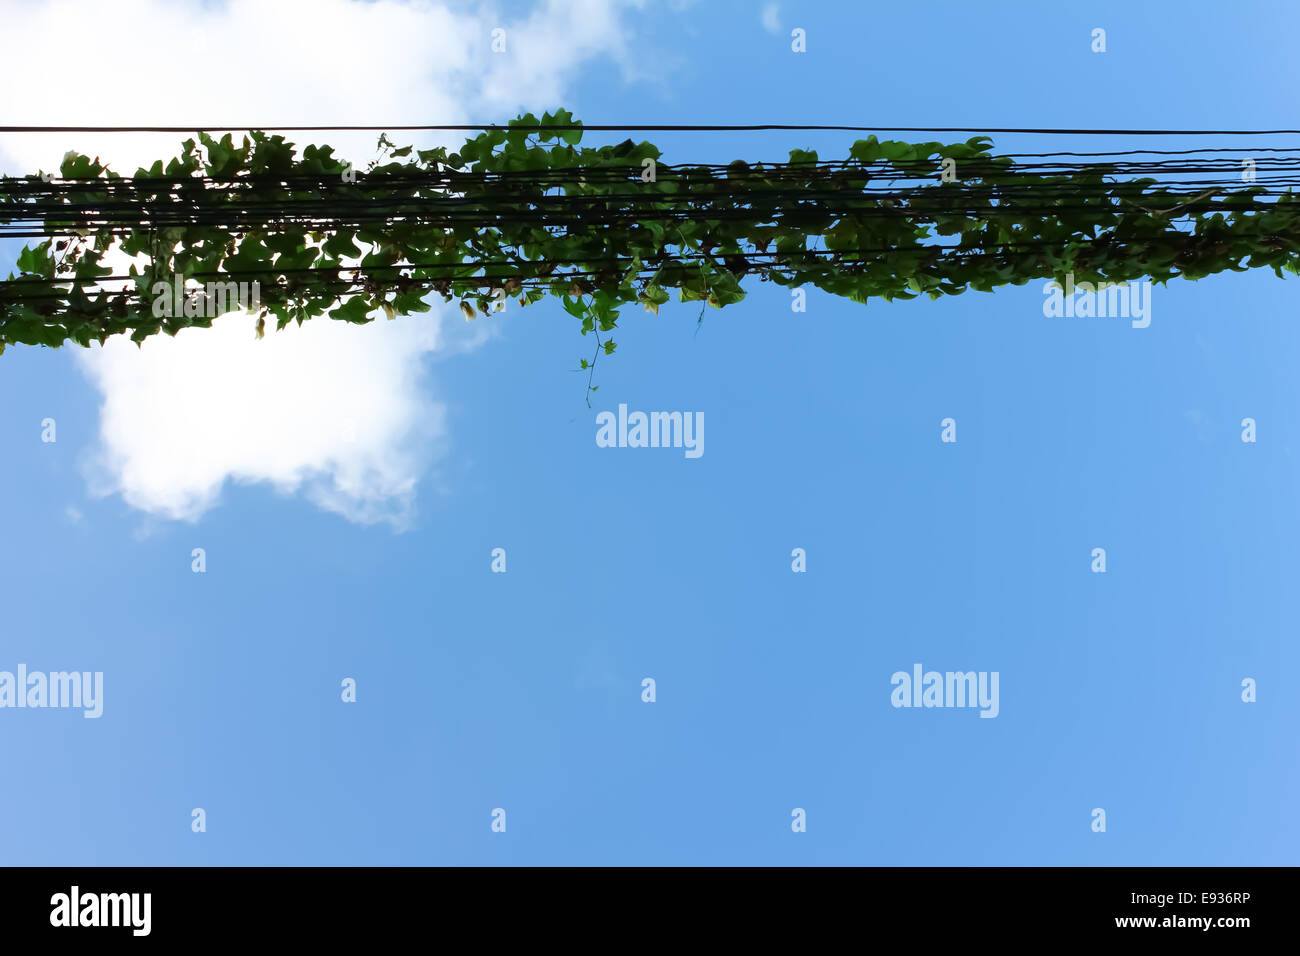 Ivy on power lines with blue sky. Stock Photo